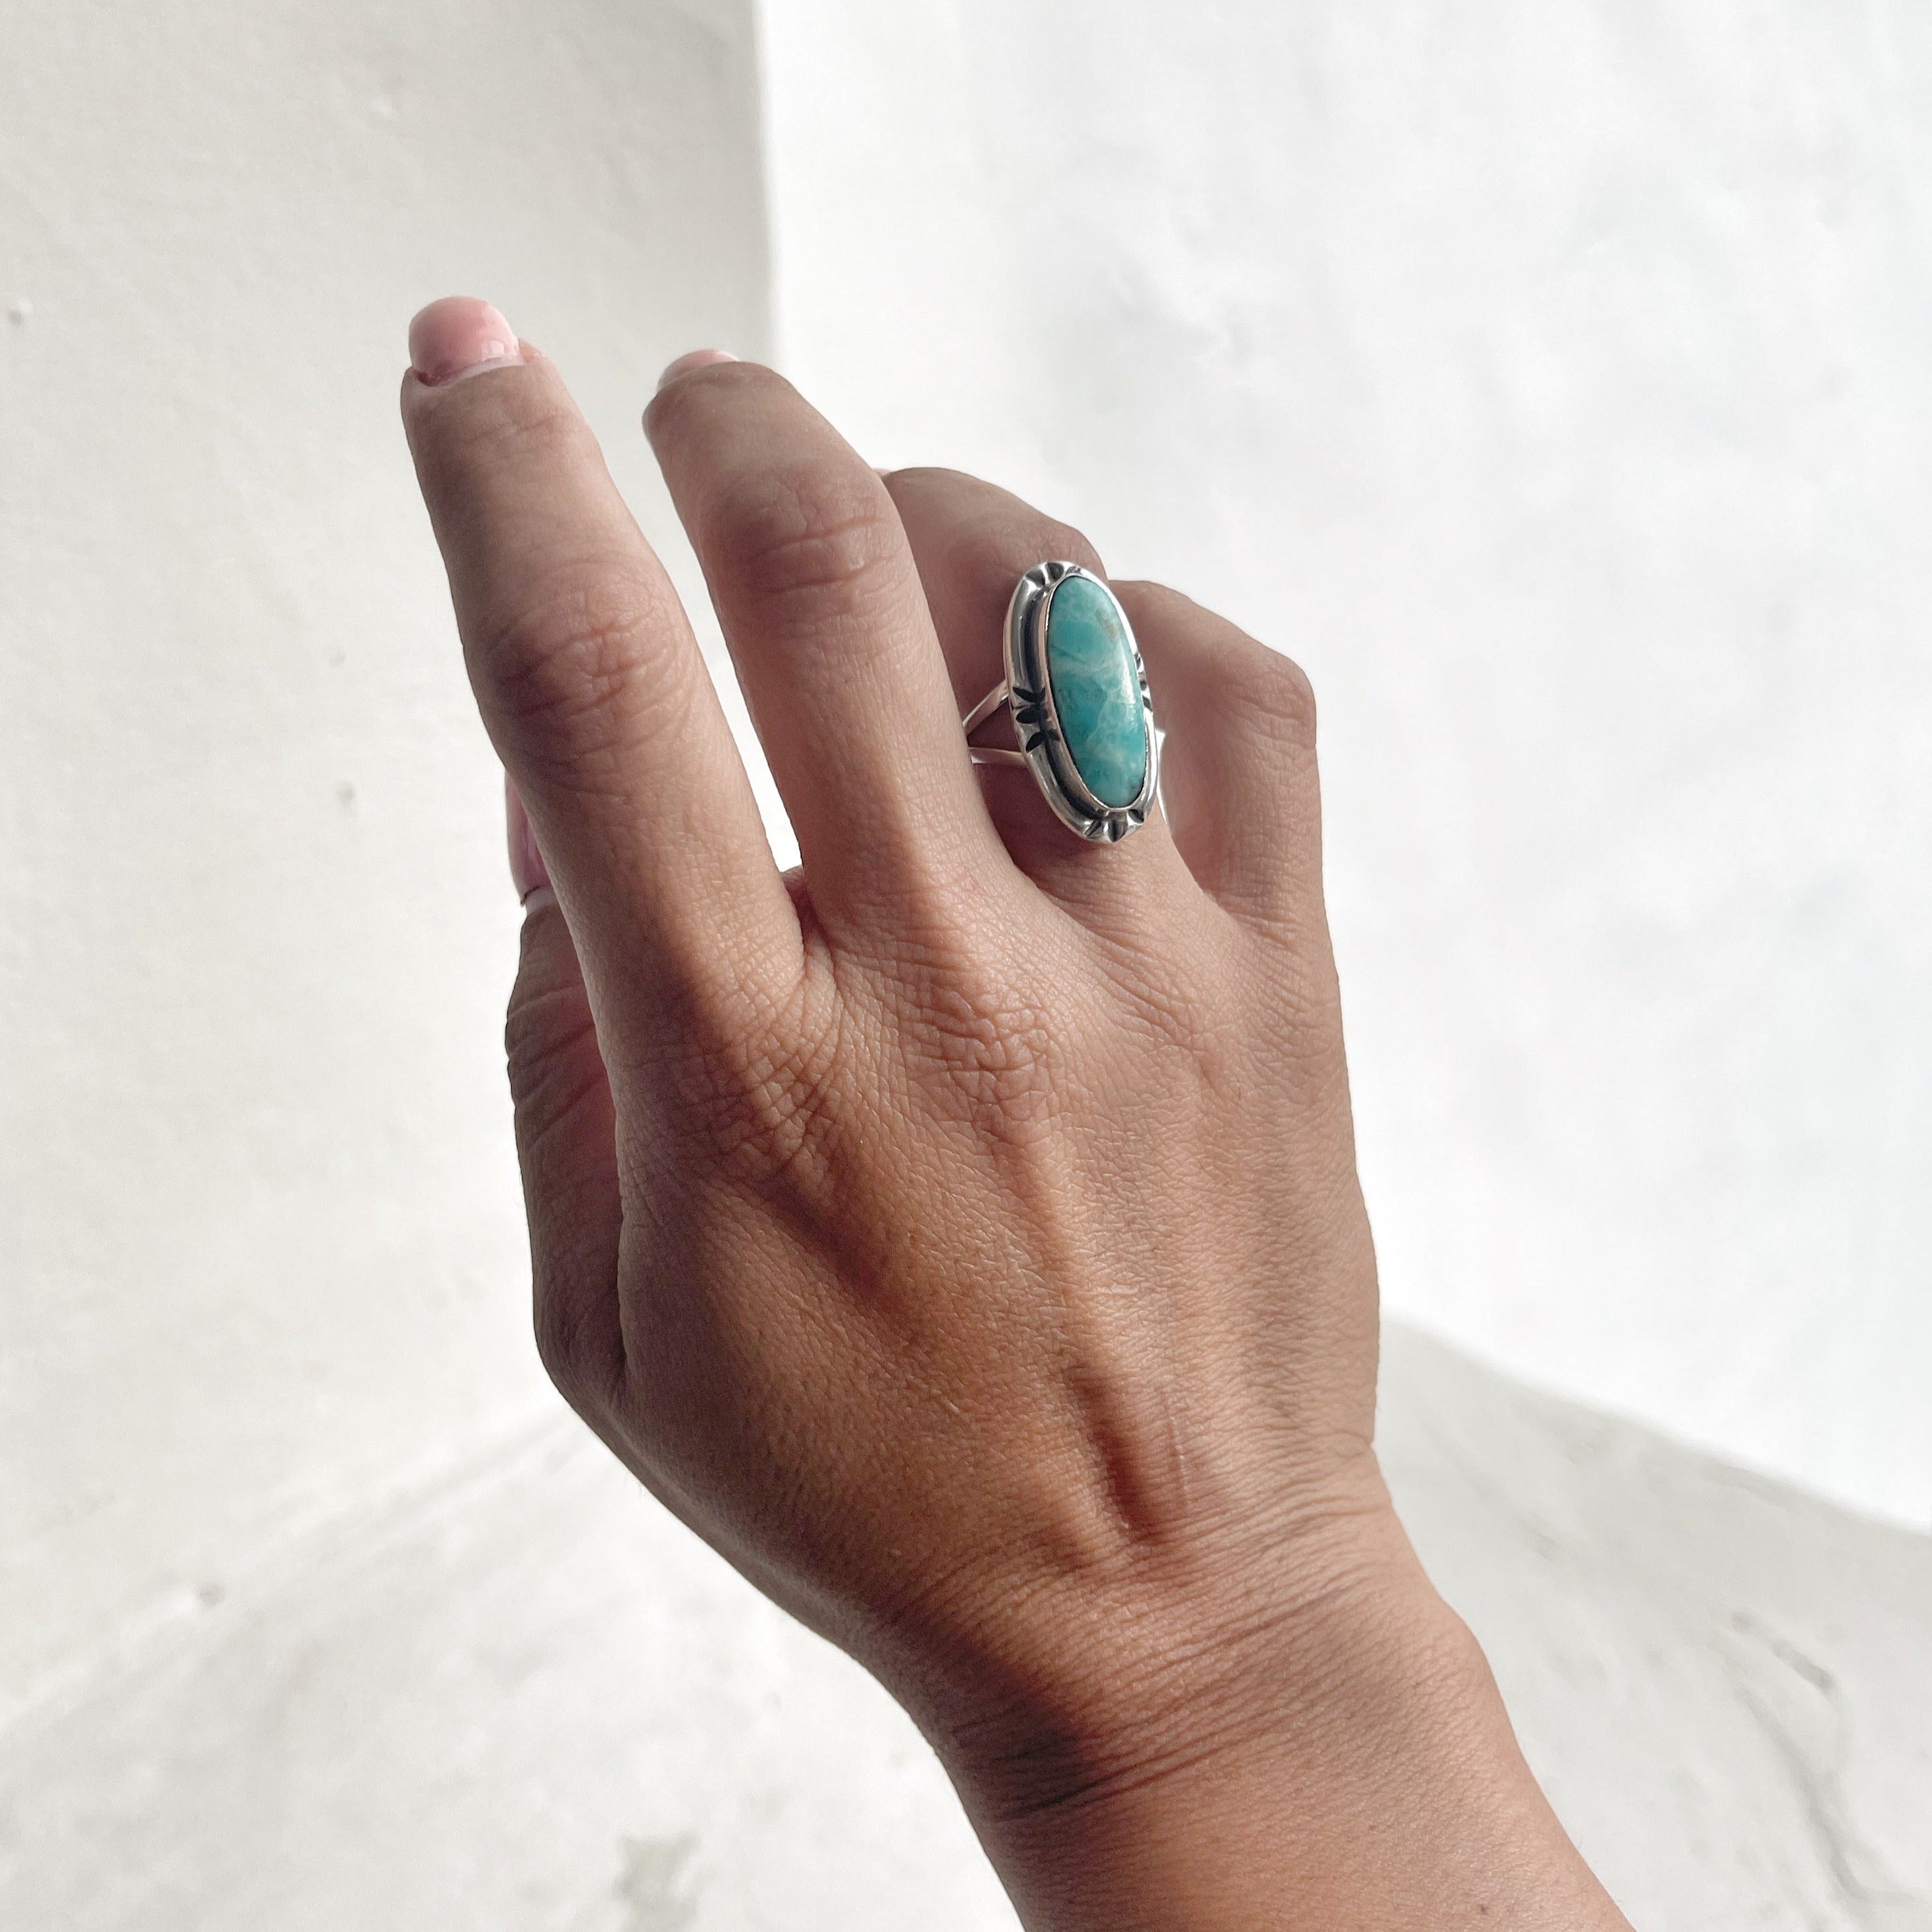 Indie Handcrafted 980 Silver Turquoise Ring